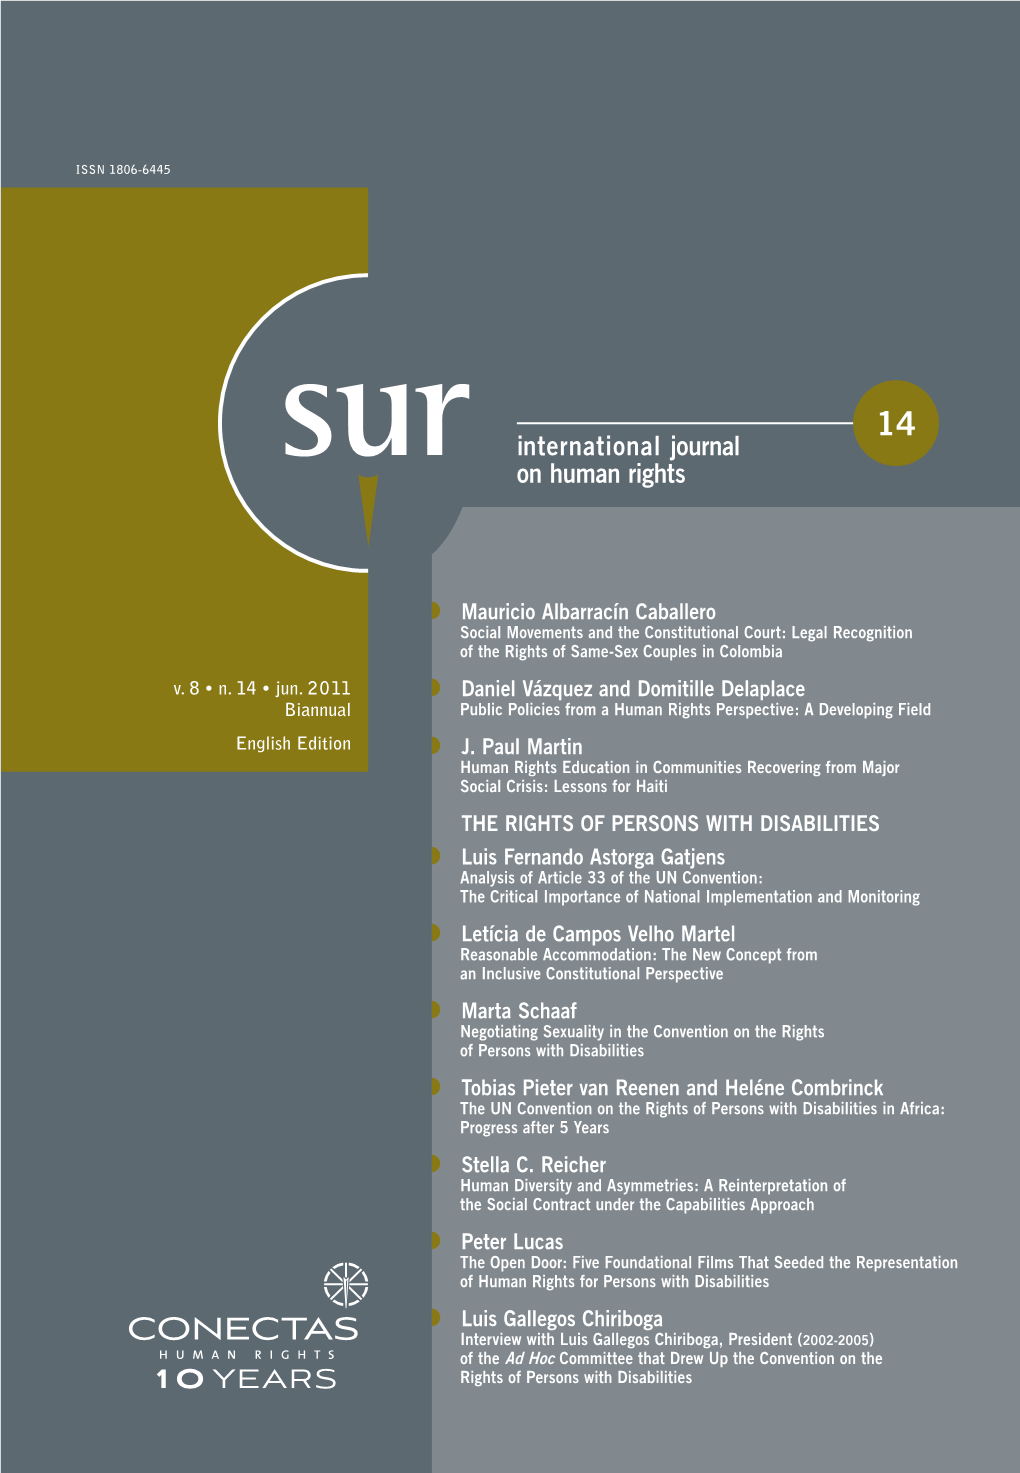 SUR - International Journal on Human Rights Is a Biannual Journal Published in English, Portuguese and Spanish by Conectas Human Rights